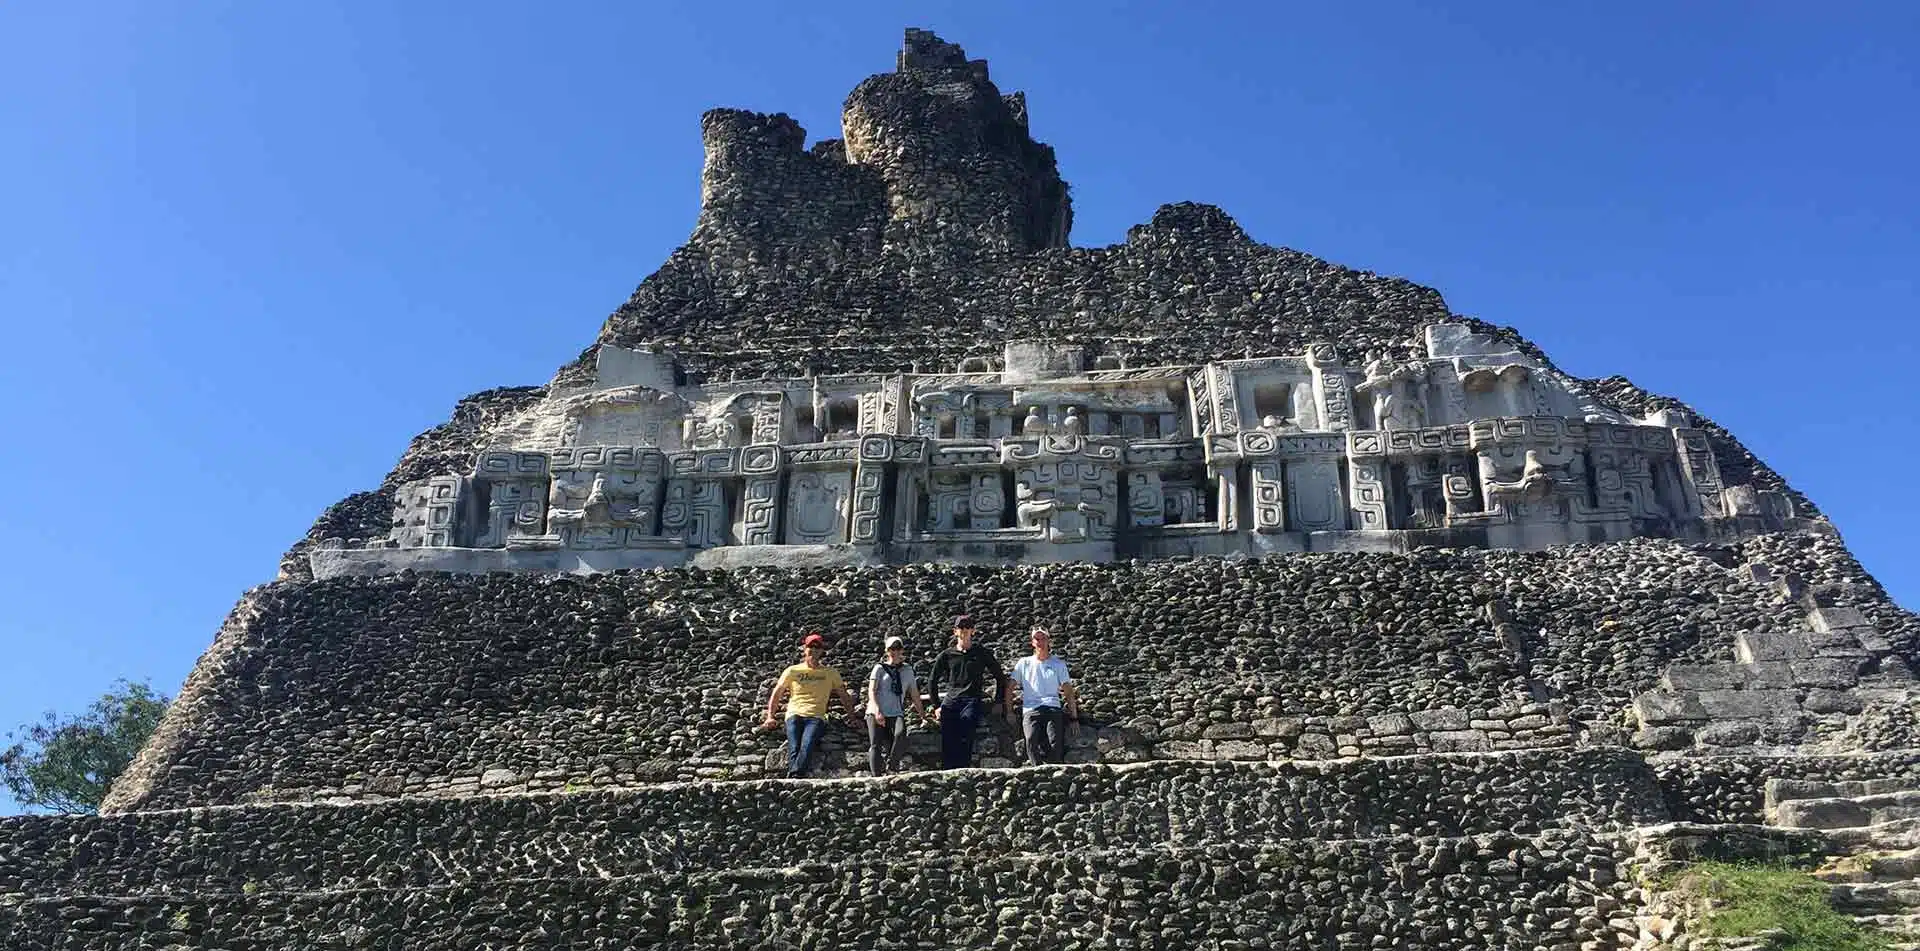 Central America Belize group posing ancient Mayan ruins historical architecture - luxury vacation destinations